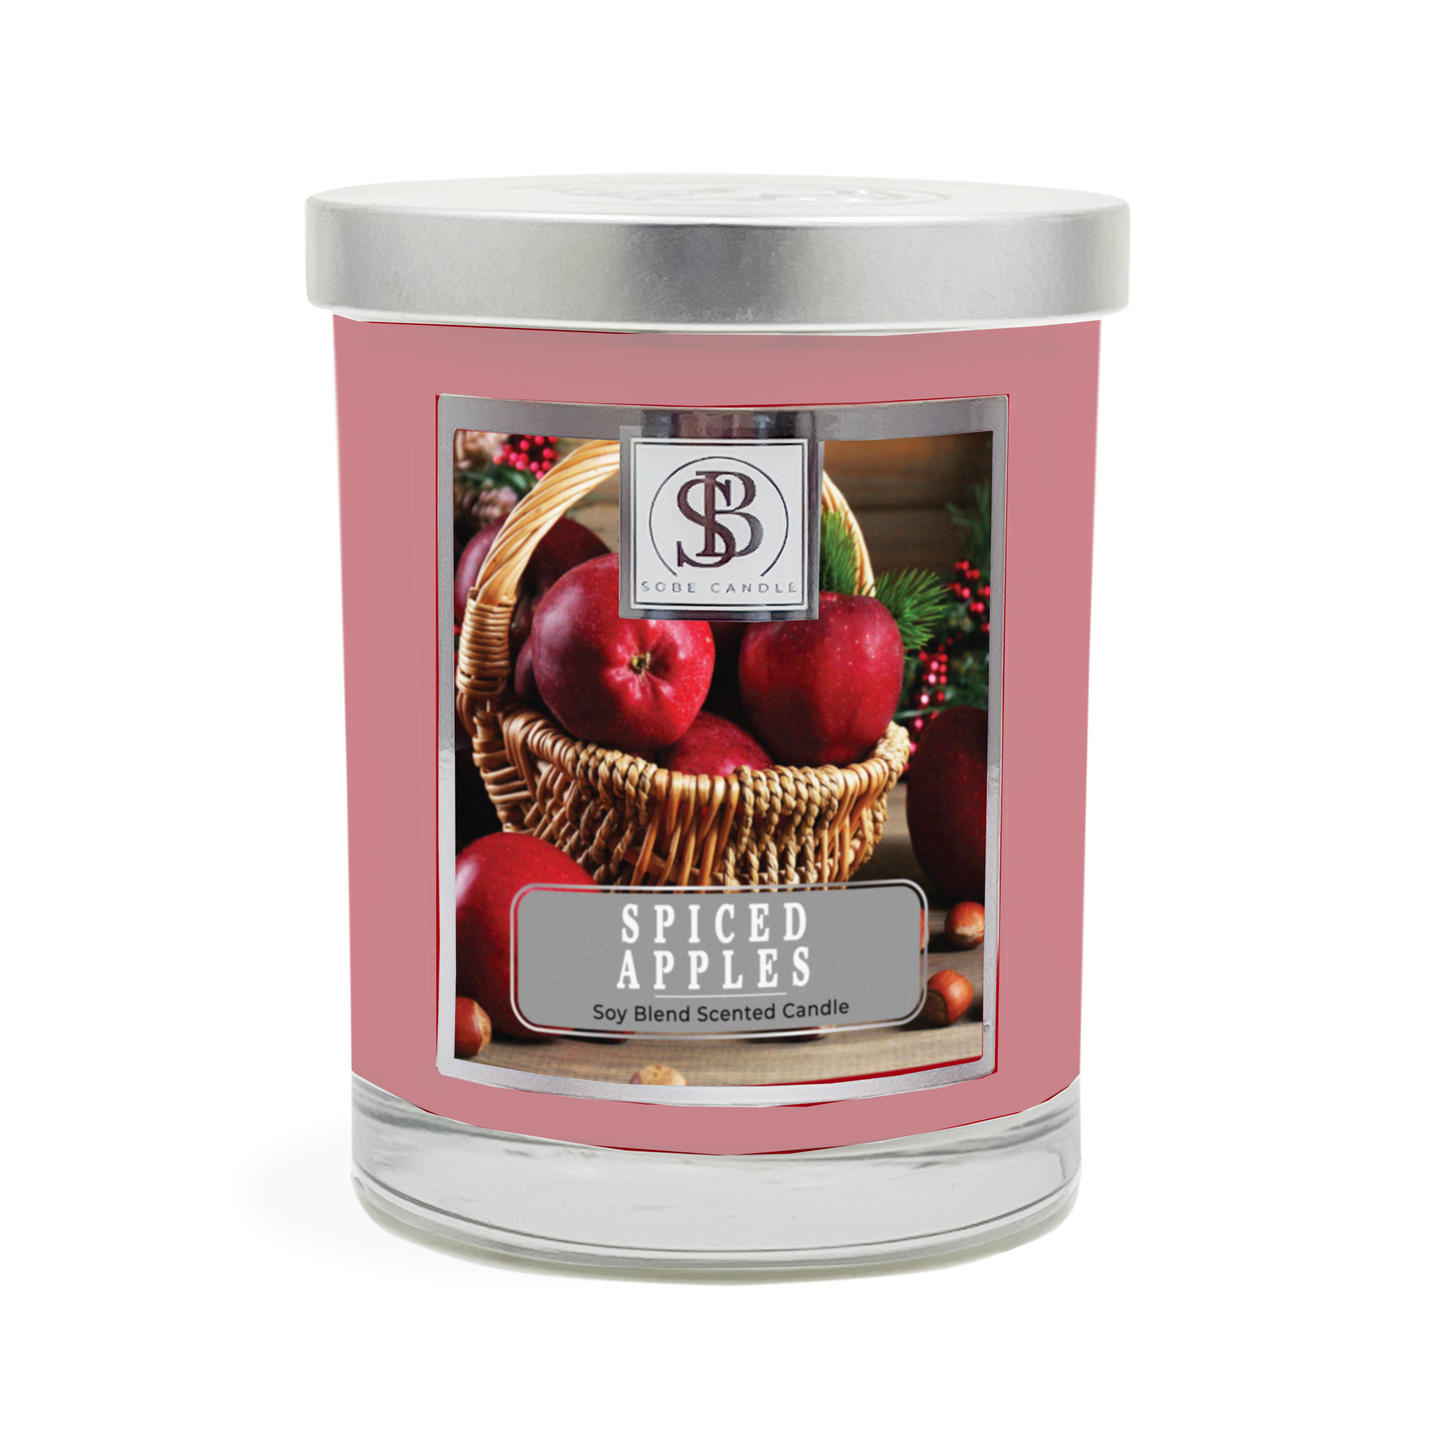 SPICED APPLES | Soy Scented Candle 11 oz